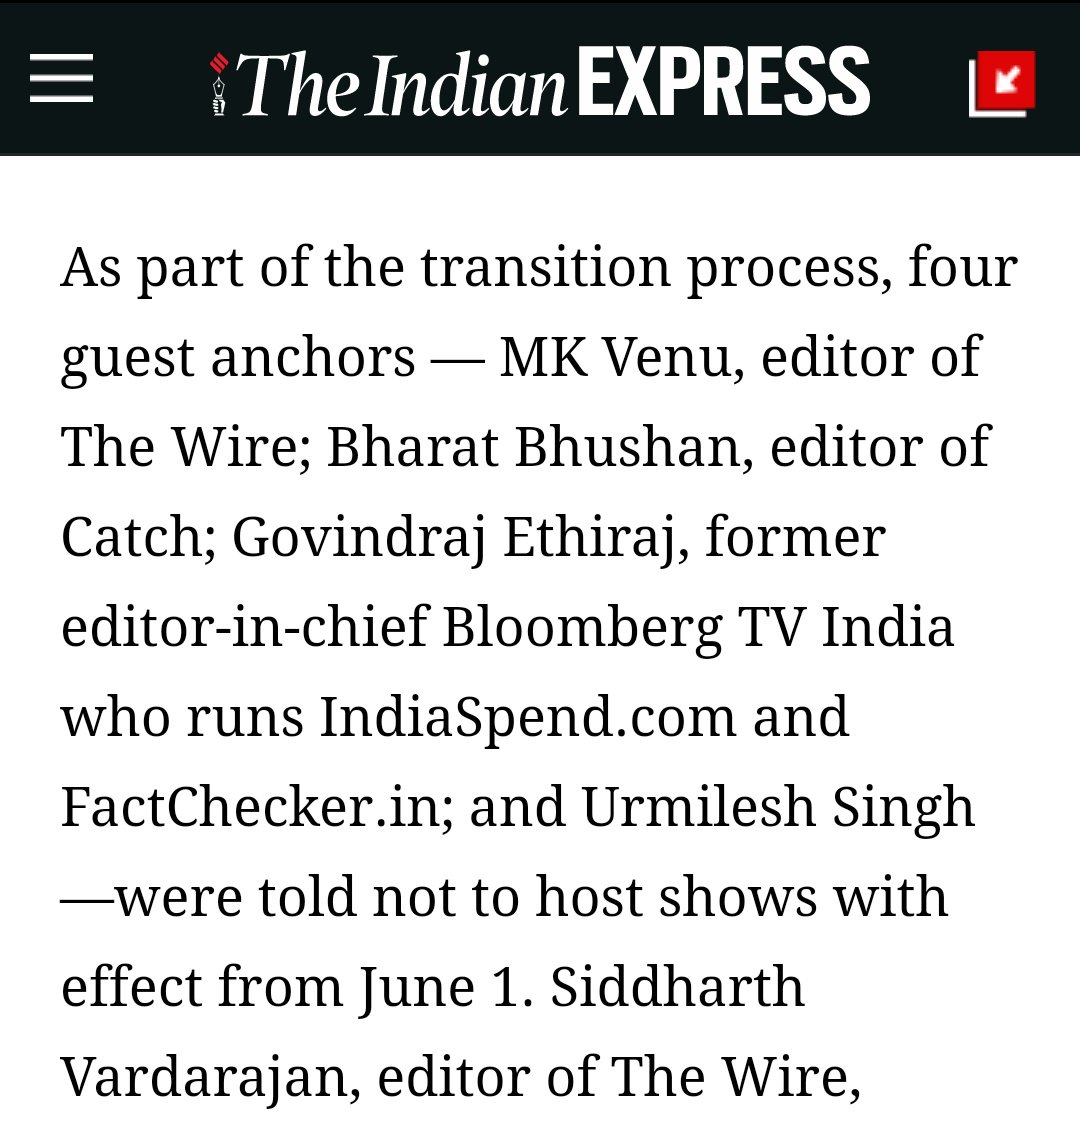 All four selected as 'Guest Anchors' were editors of propaganda sites like The Wire, Catch News, etcModi hatred was selection criteria?